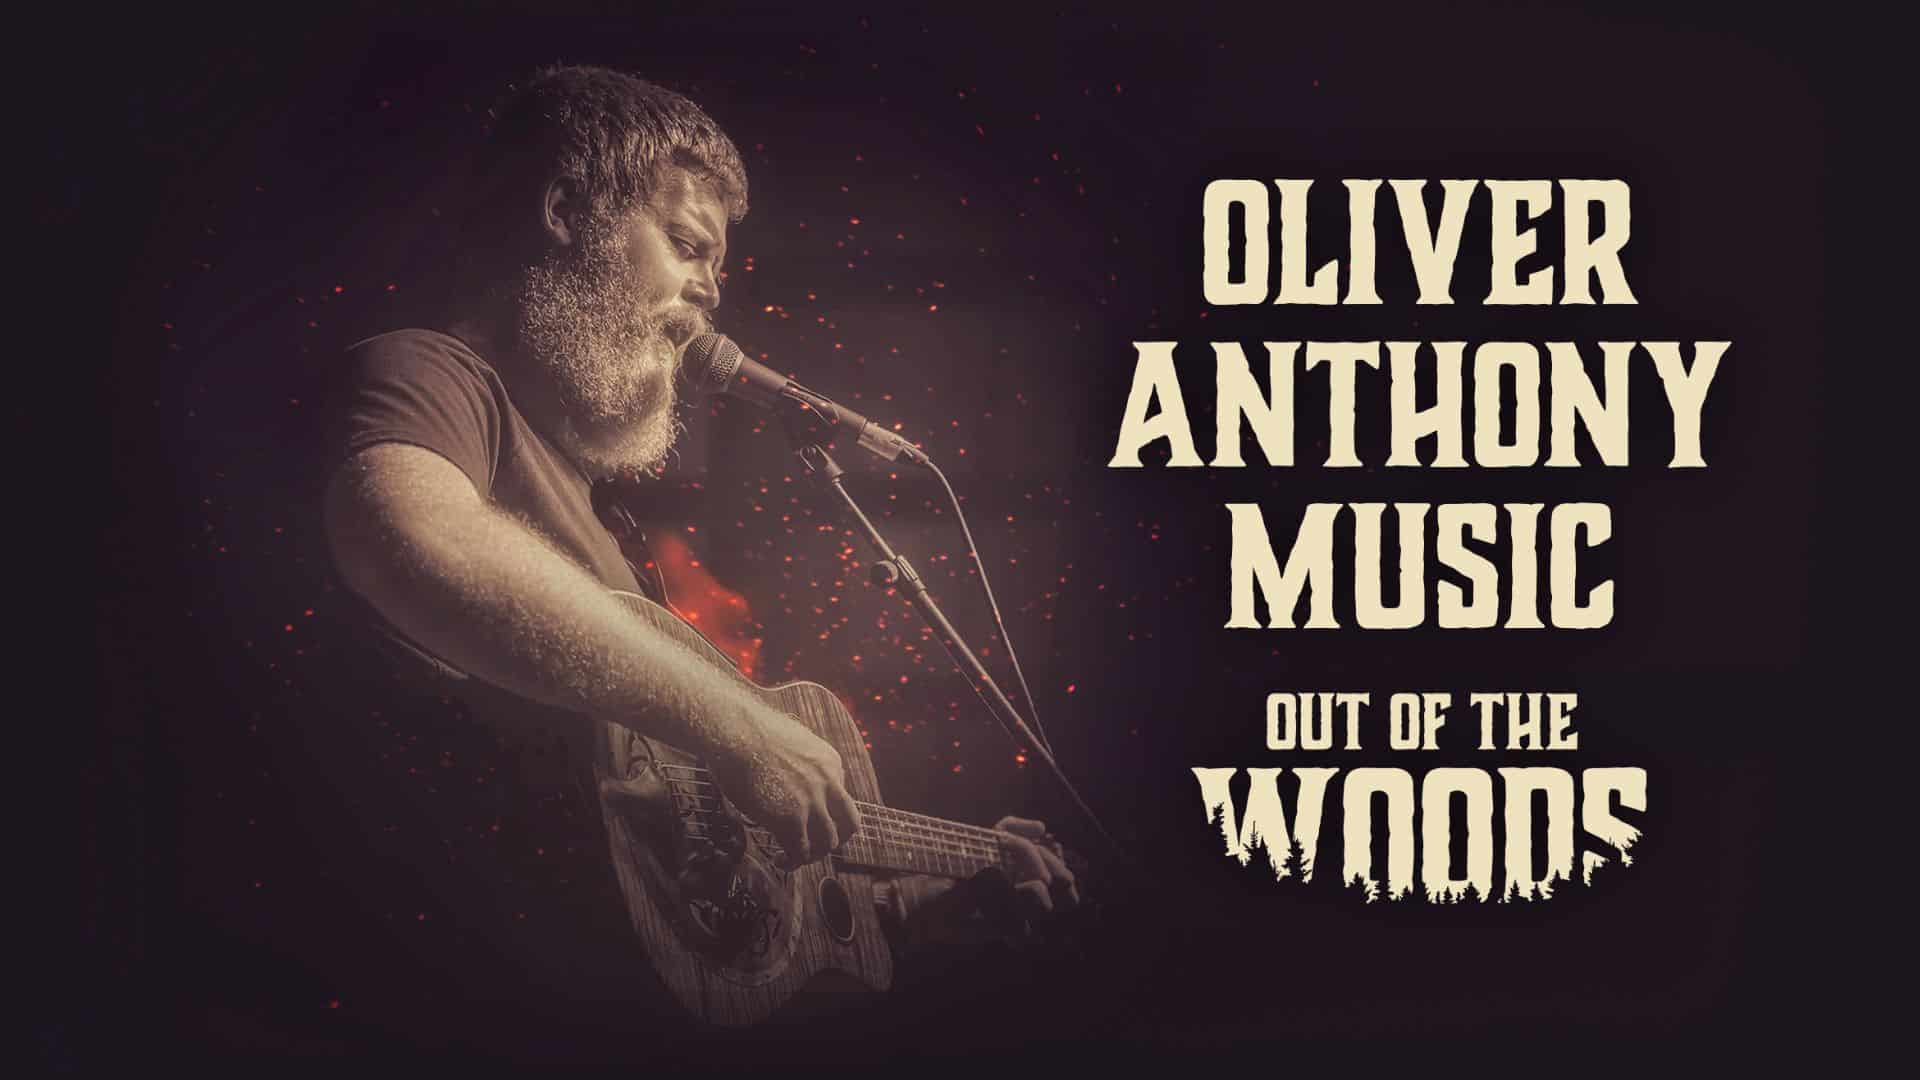 Oliver Anthony Music - Out of the Woods Tour